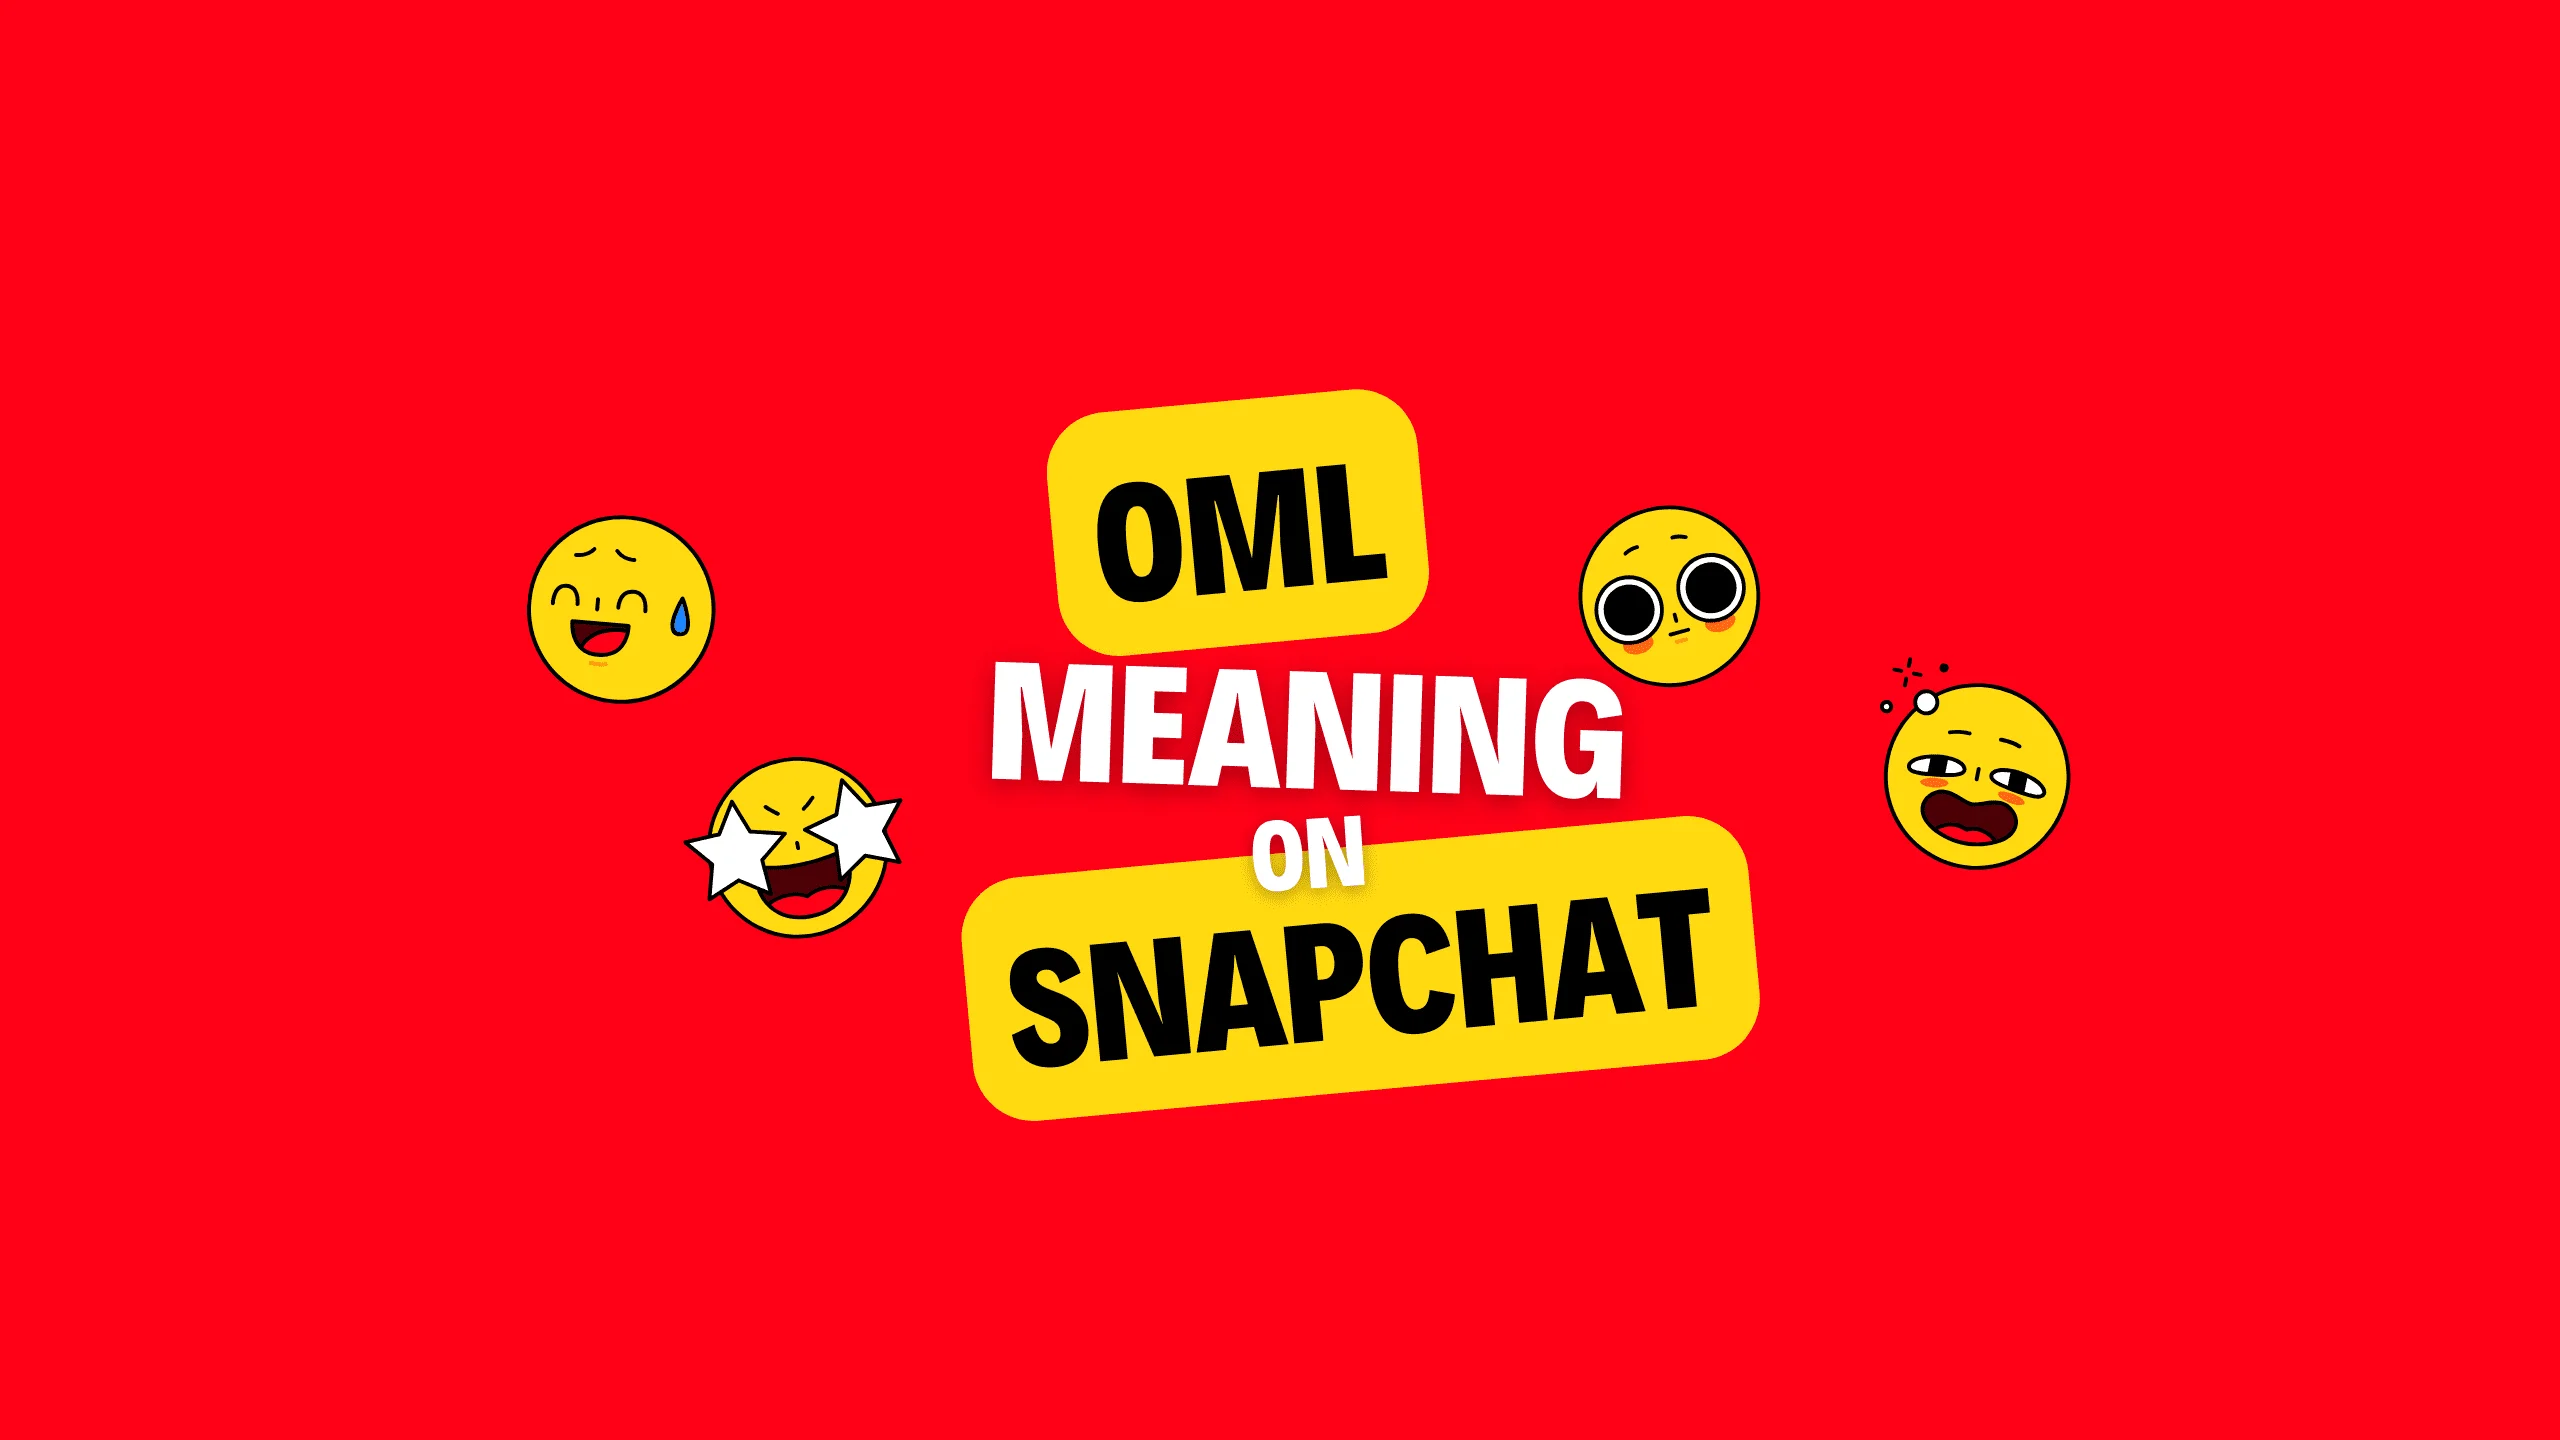 What does OML mean on Snapchat